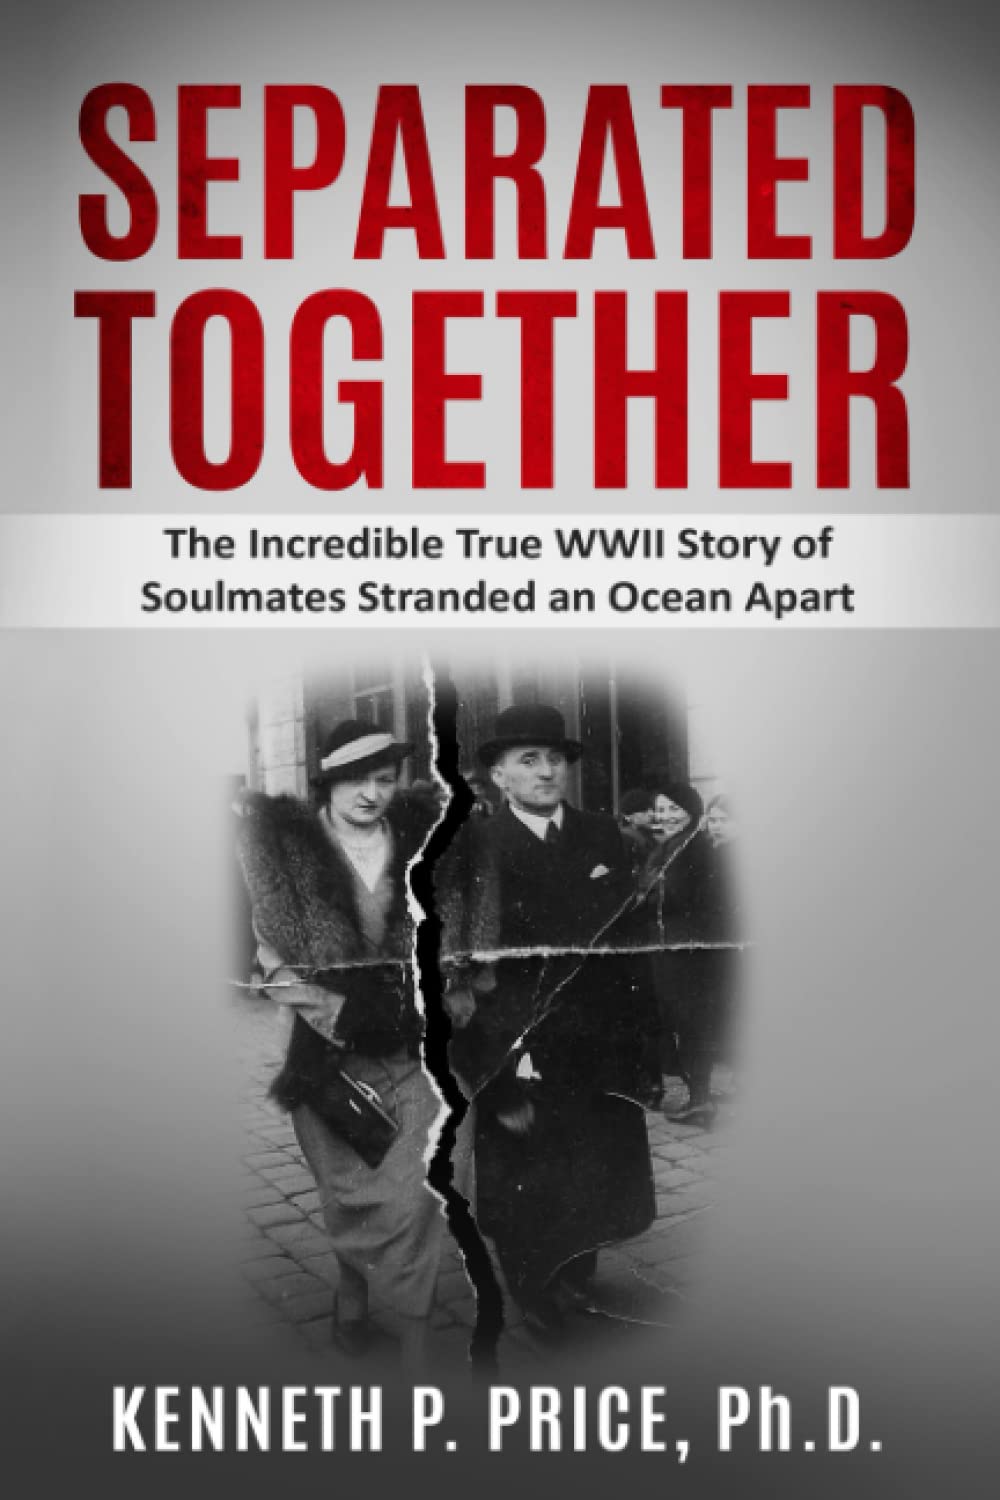 Separated Together: The Incredible True WWII Story of Soulmates Stranded an Ocean Apart (Holocaust Survivor True Stories WWII)